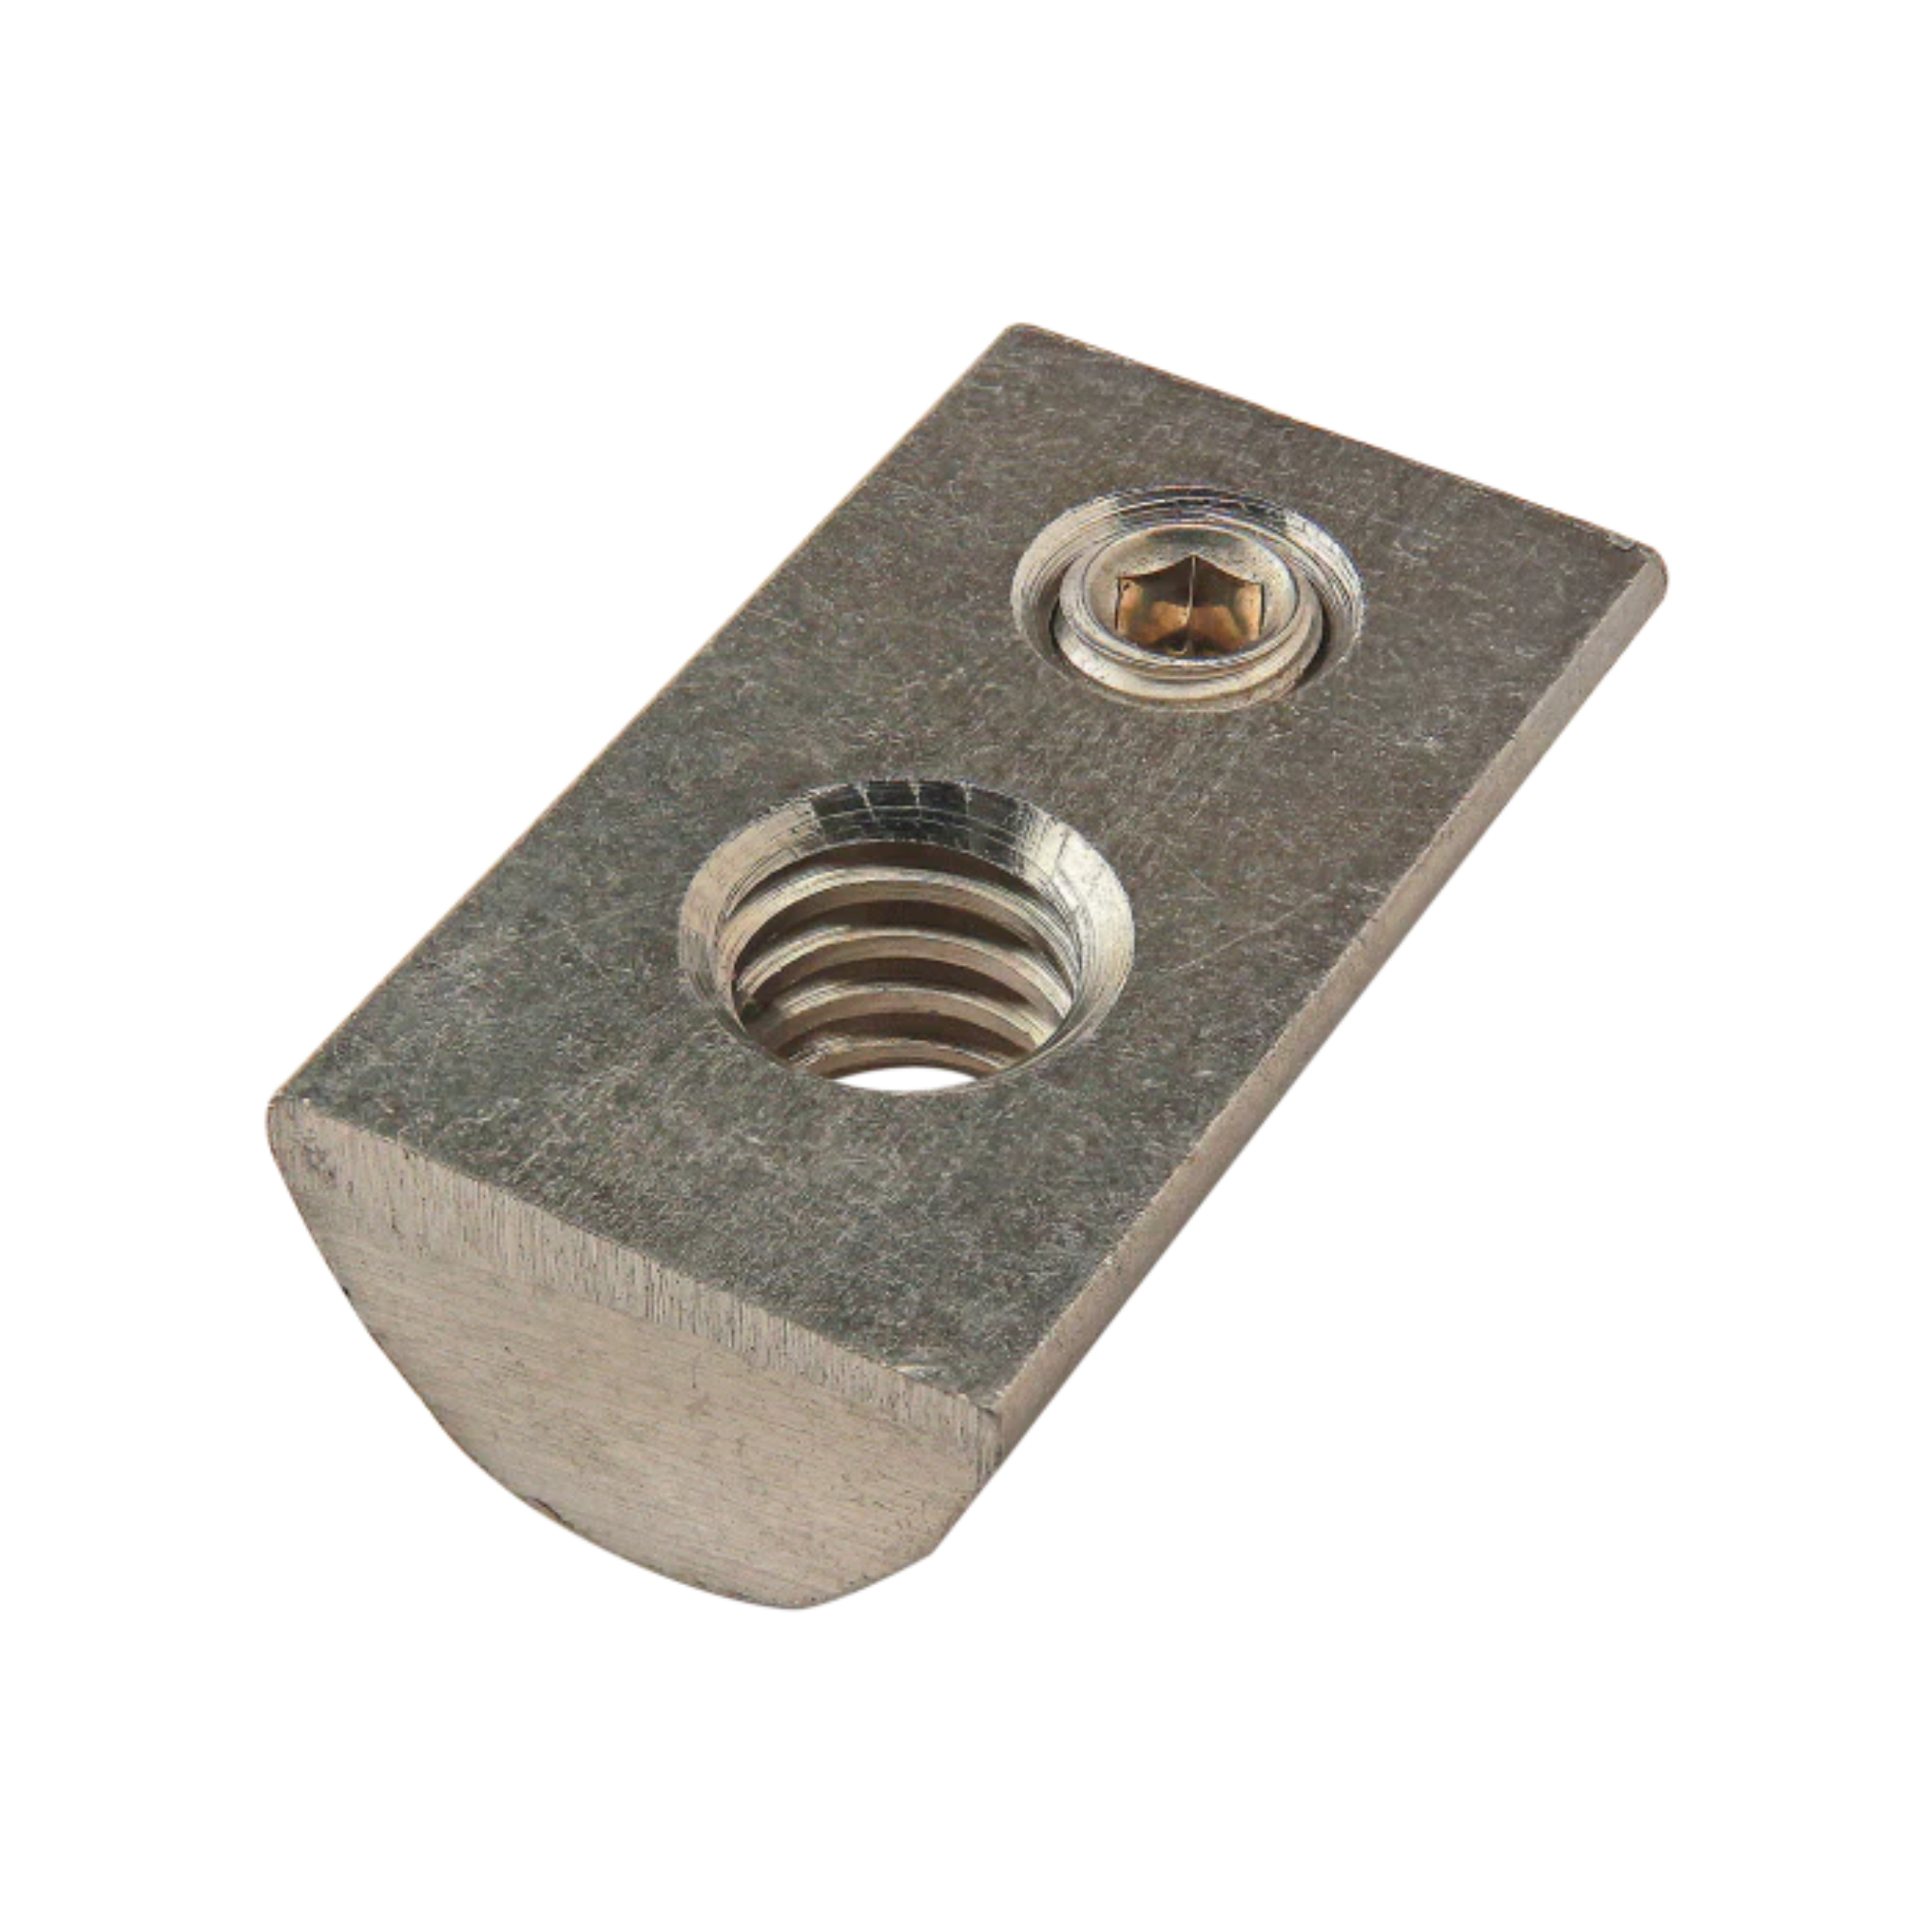 metal, rectangular t-nut with a rounded bottom and flat top, a threaded hole on one side and a screw set in a hole on the other side